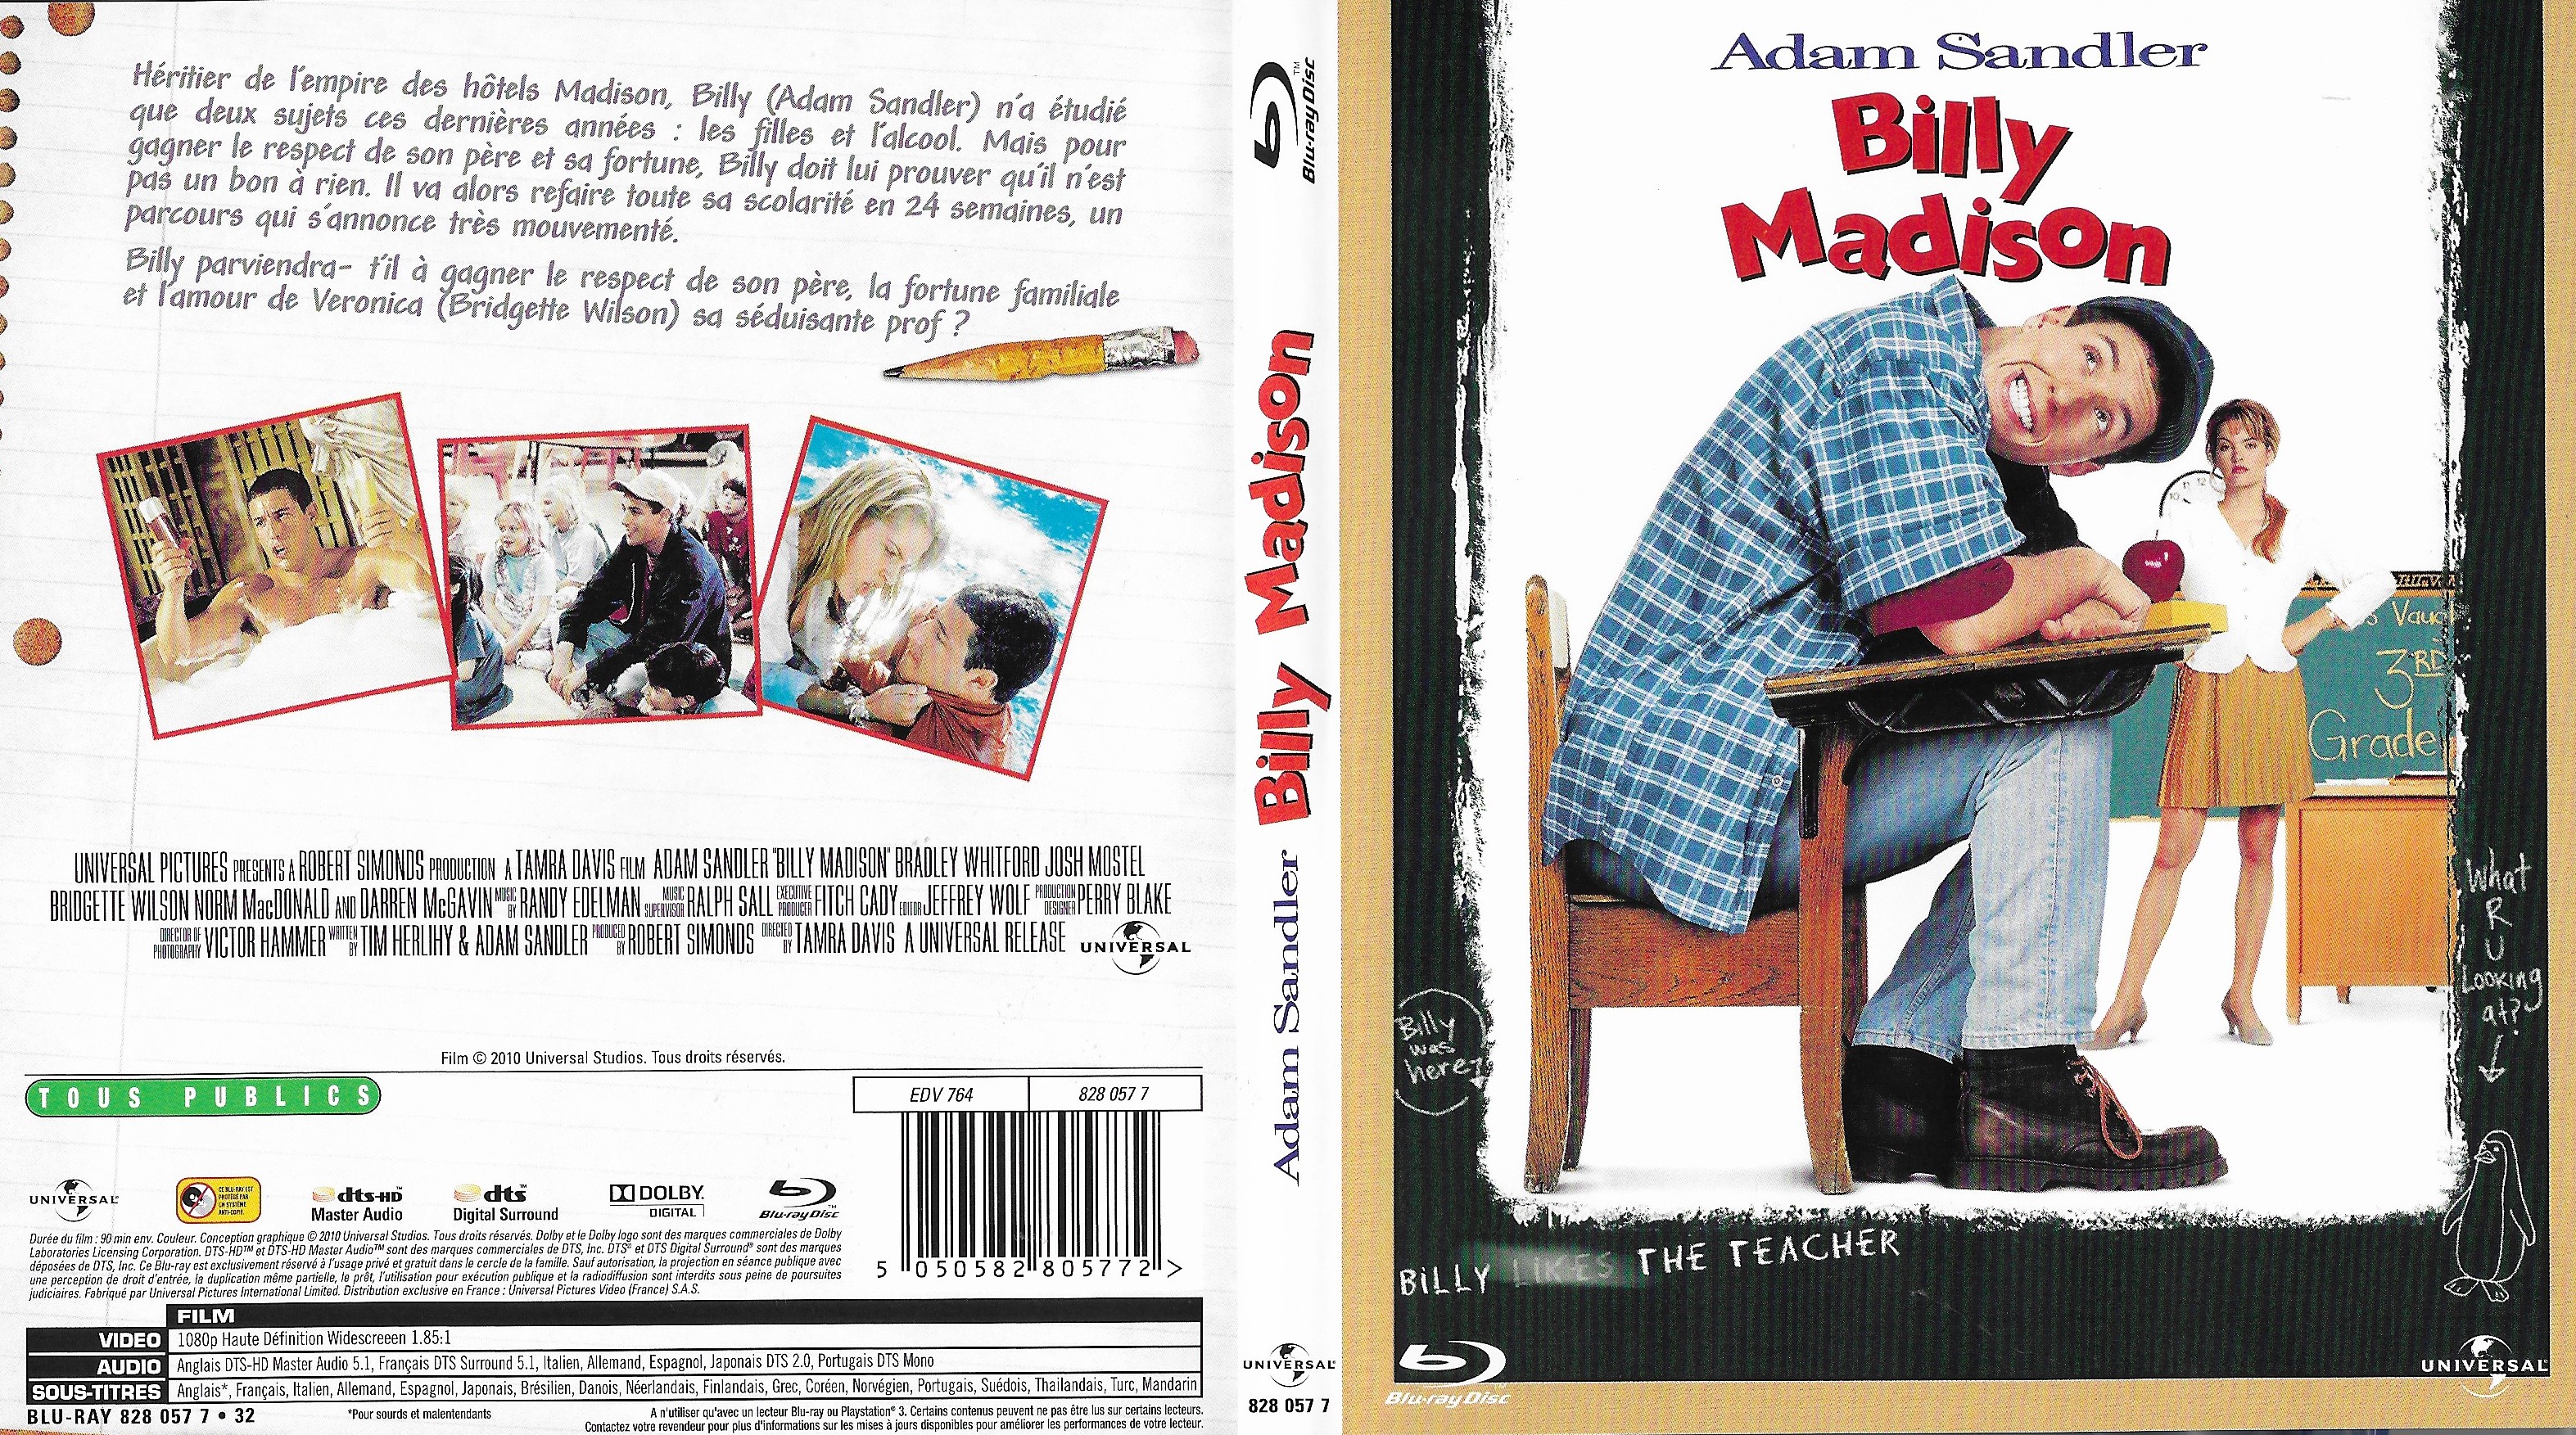 Jaquette DVD Billy Madison (BLU-RAY)